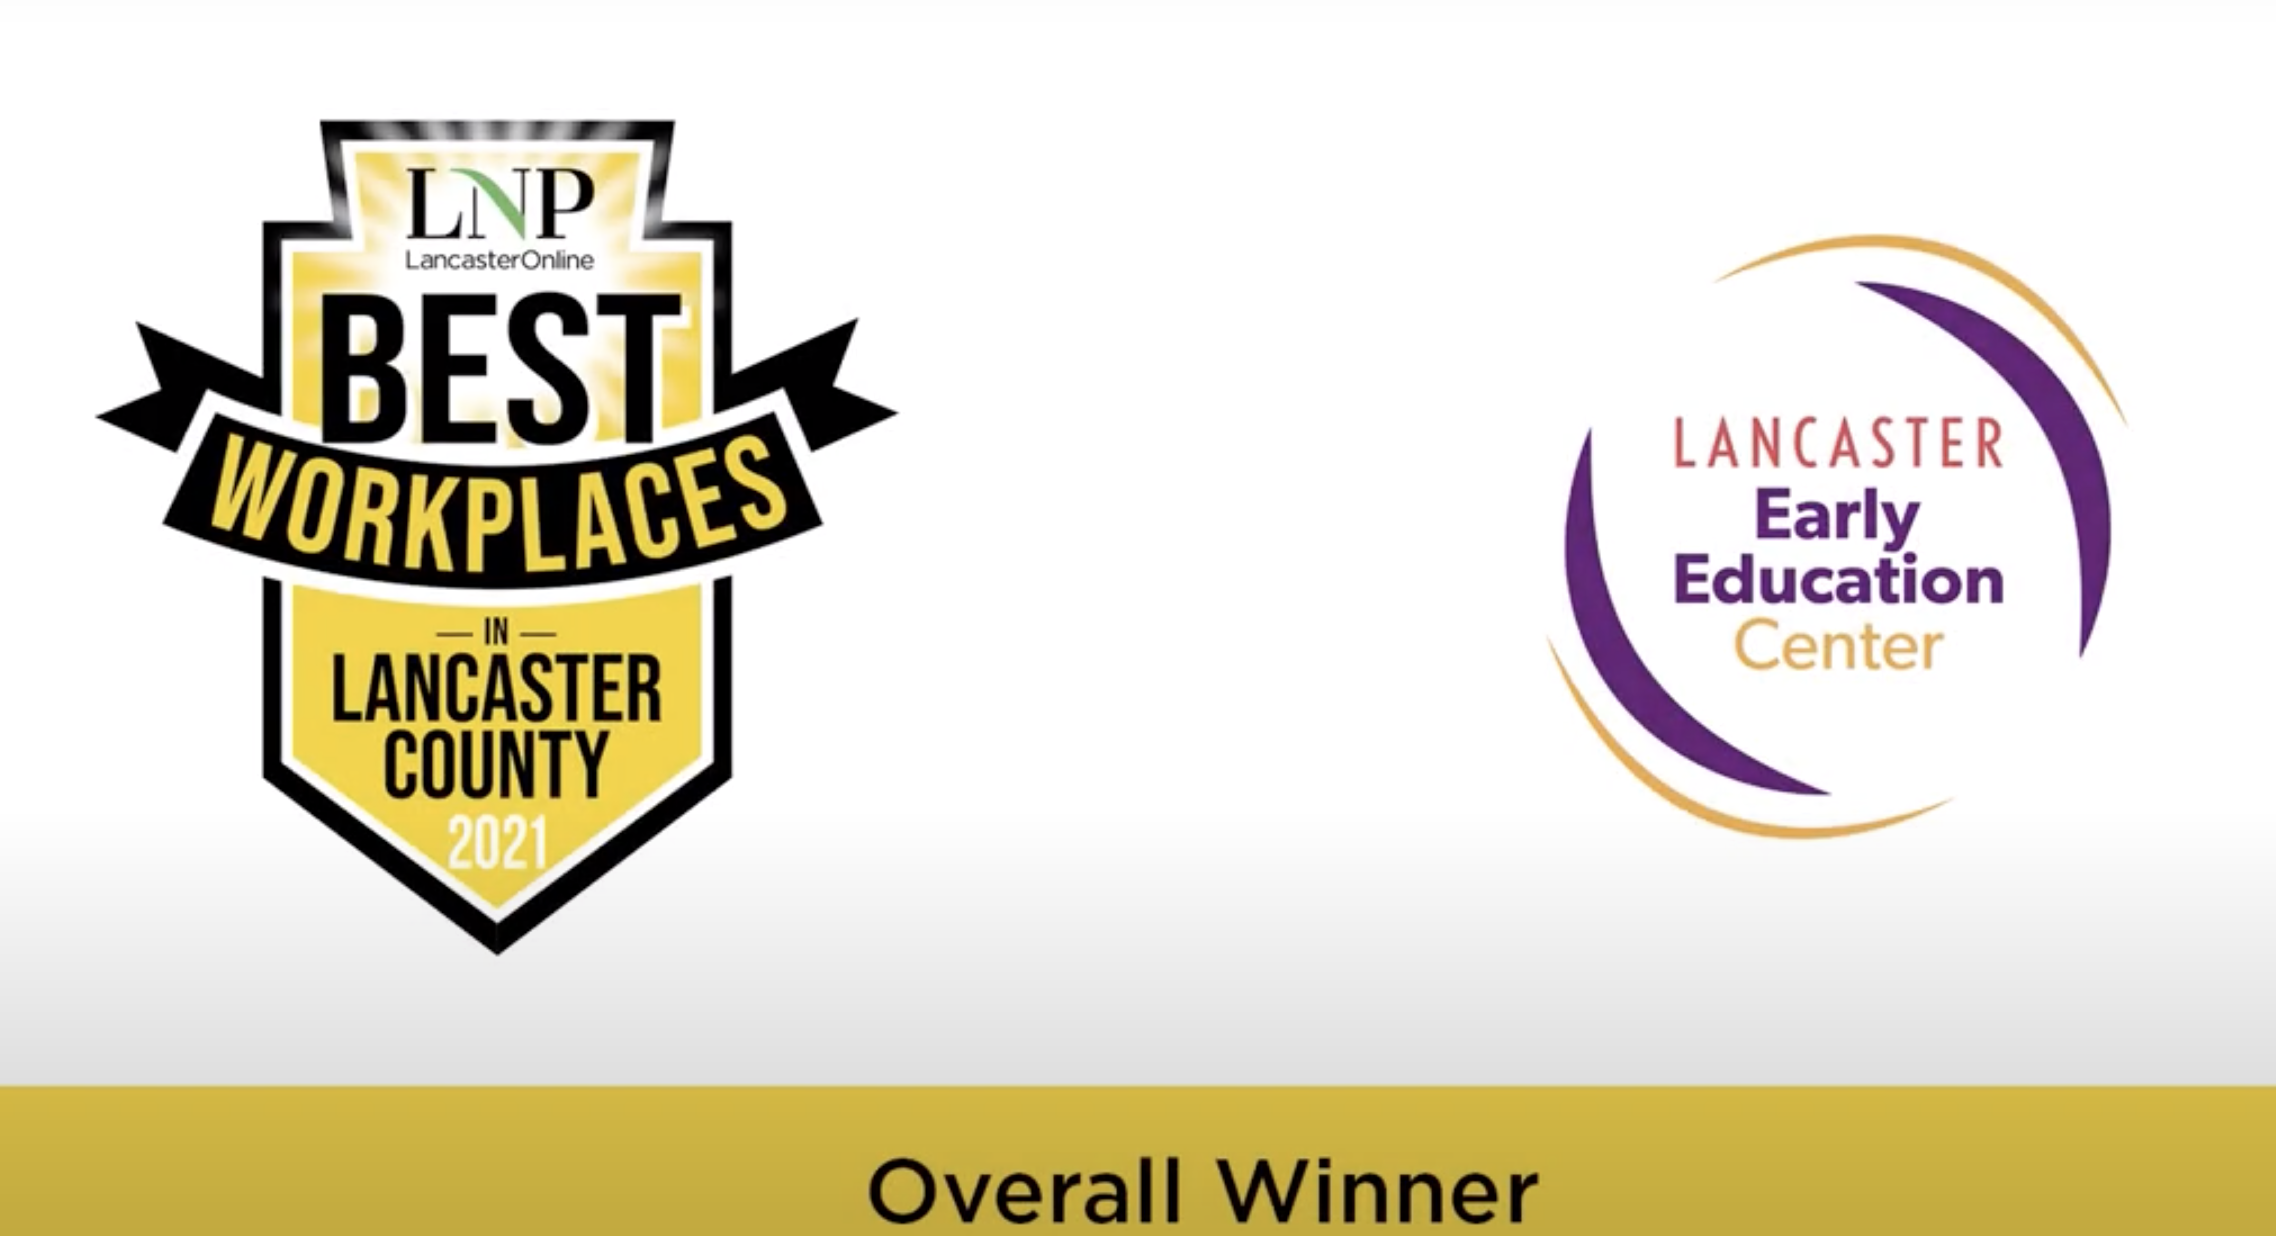 LNP 2021 Best Places to work in Lancaster PA - LEEC Voted #1 in Fun & Learning!! Work at LEEC - part time and full time jobs available in early education and more